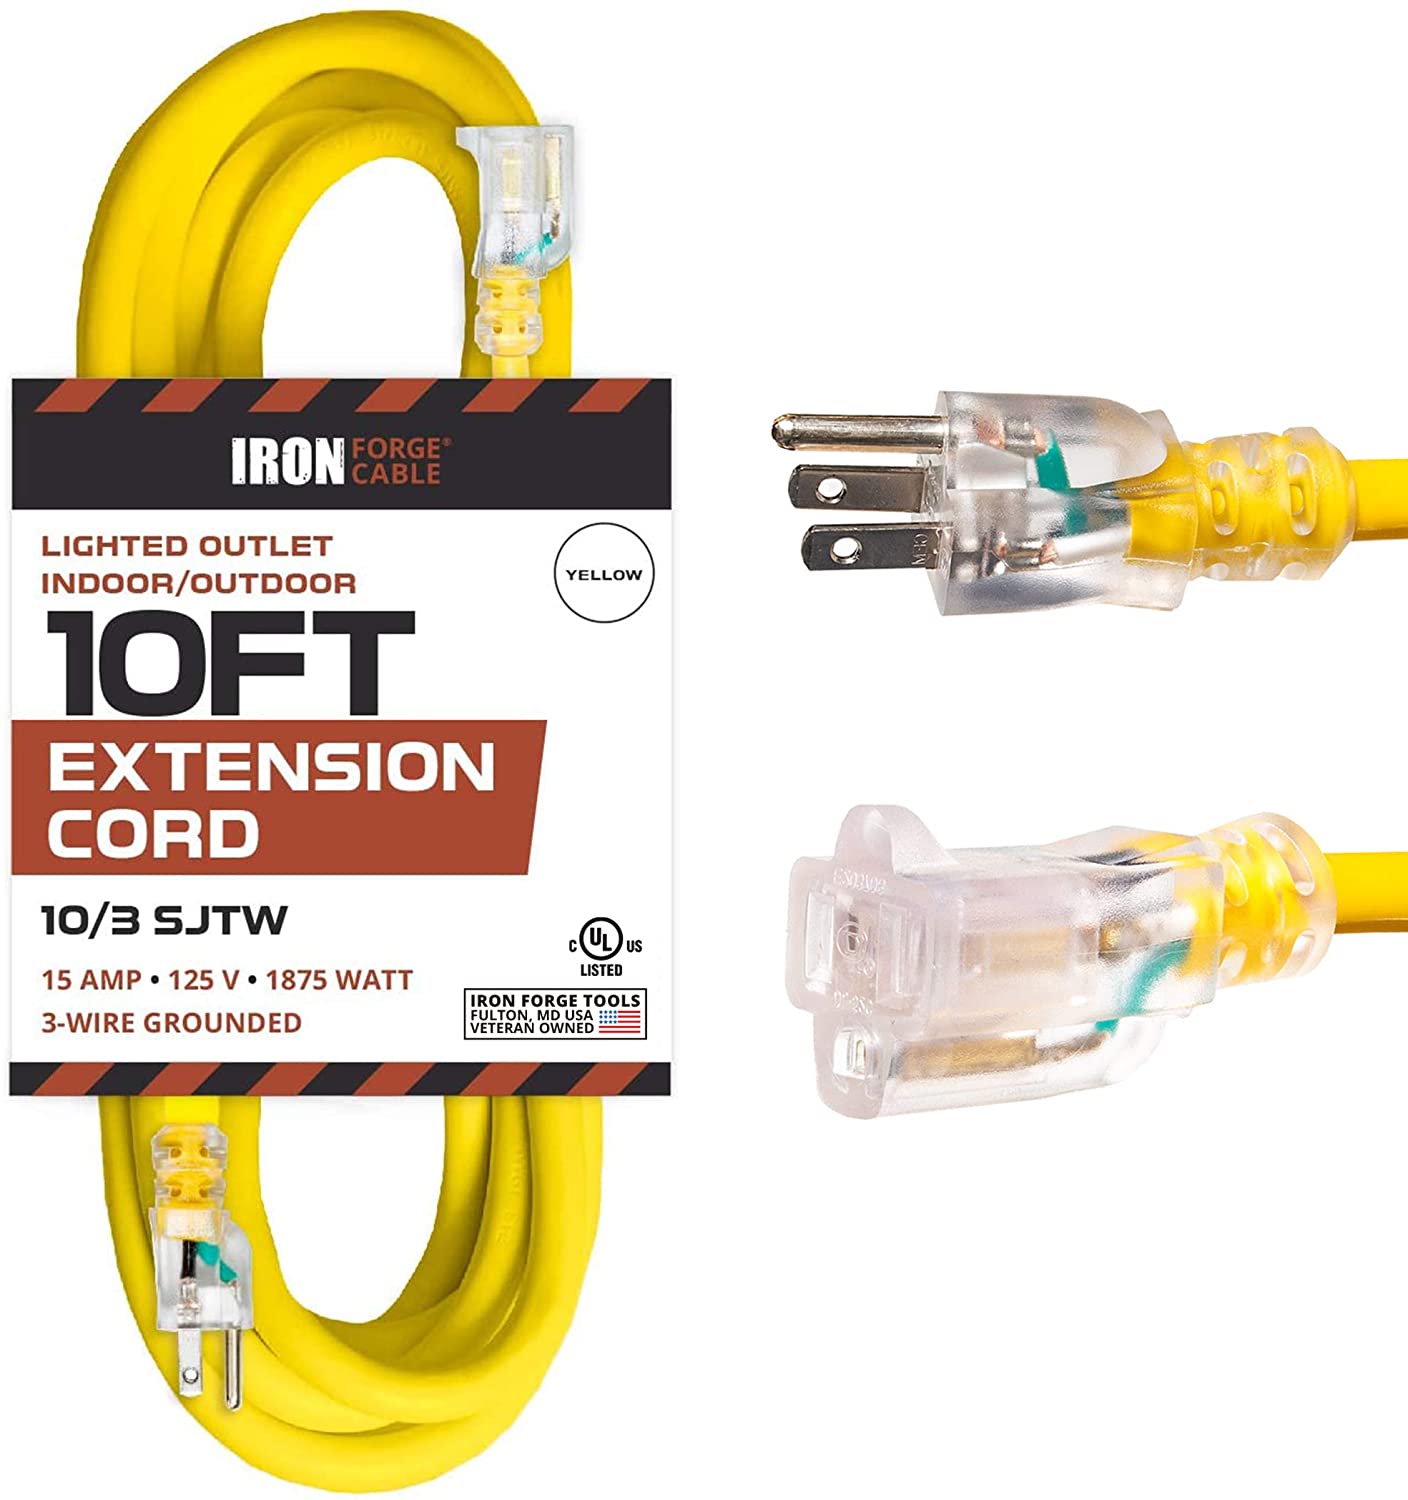 2 Pack of 100 Foot Lighted Outdoor Extension Cord - 12/3 SJTW